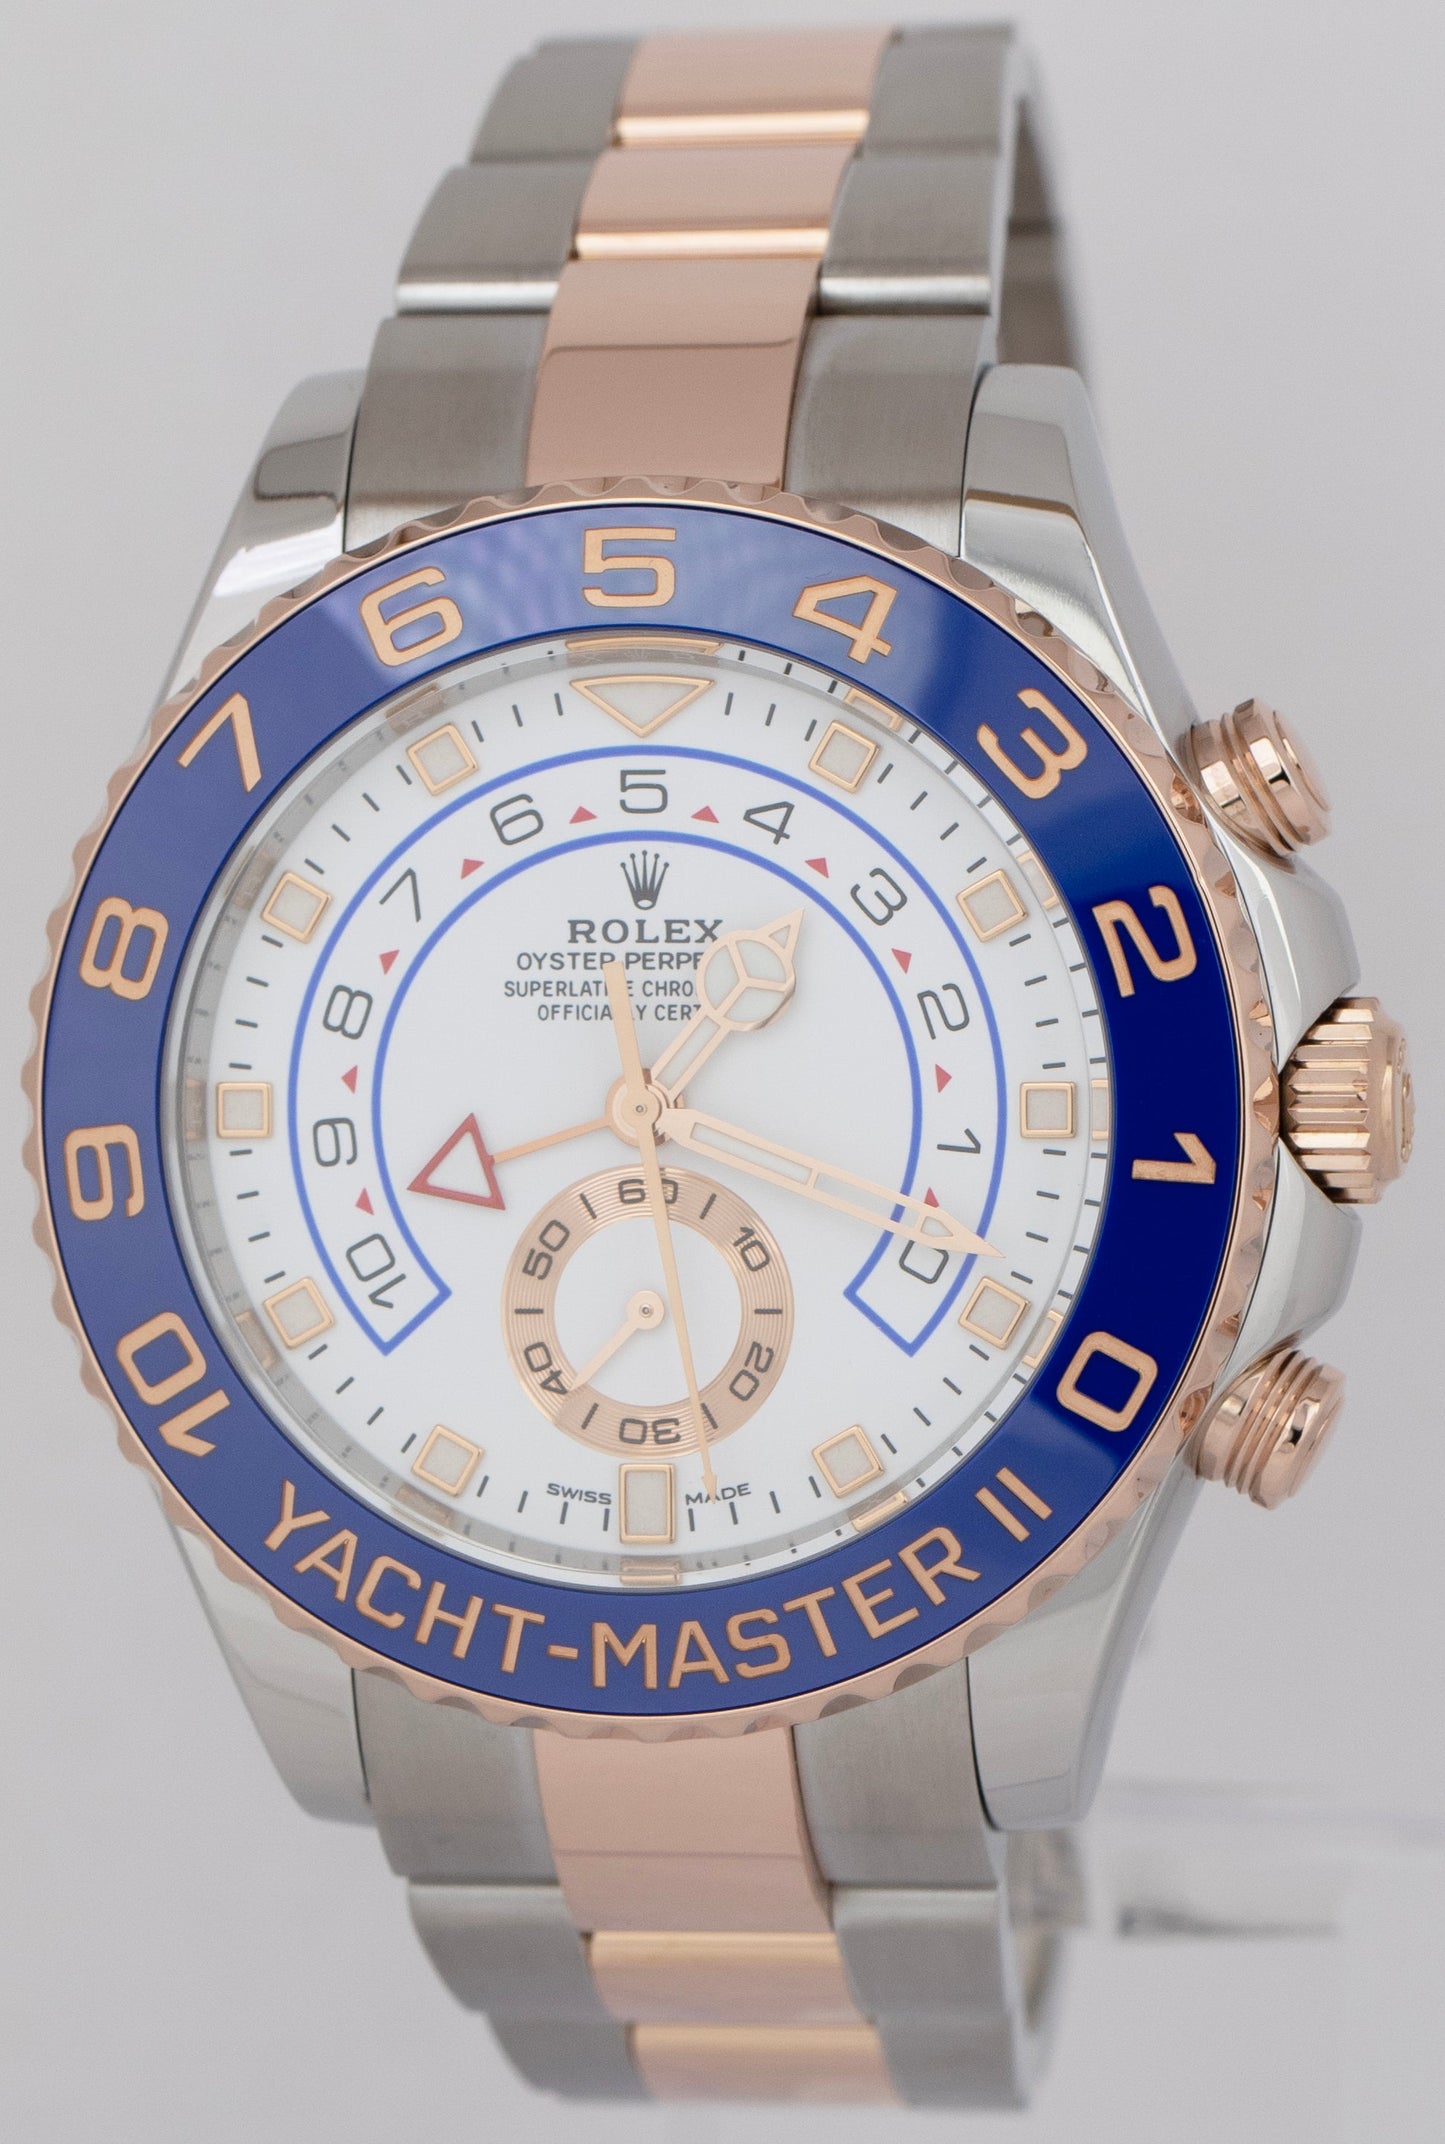 Rolex Yacht-Master II White Two-Tone 18K Rose Gold Steel 116681 44mm Watch B+P